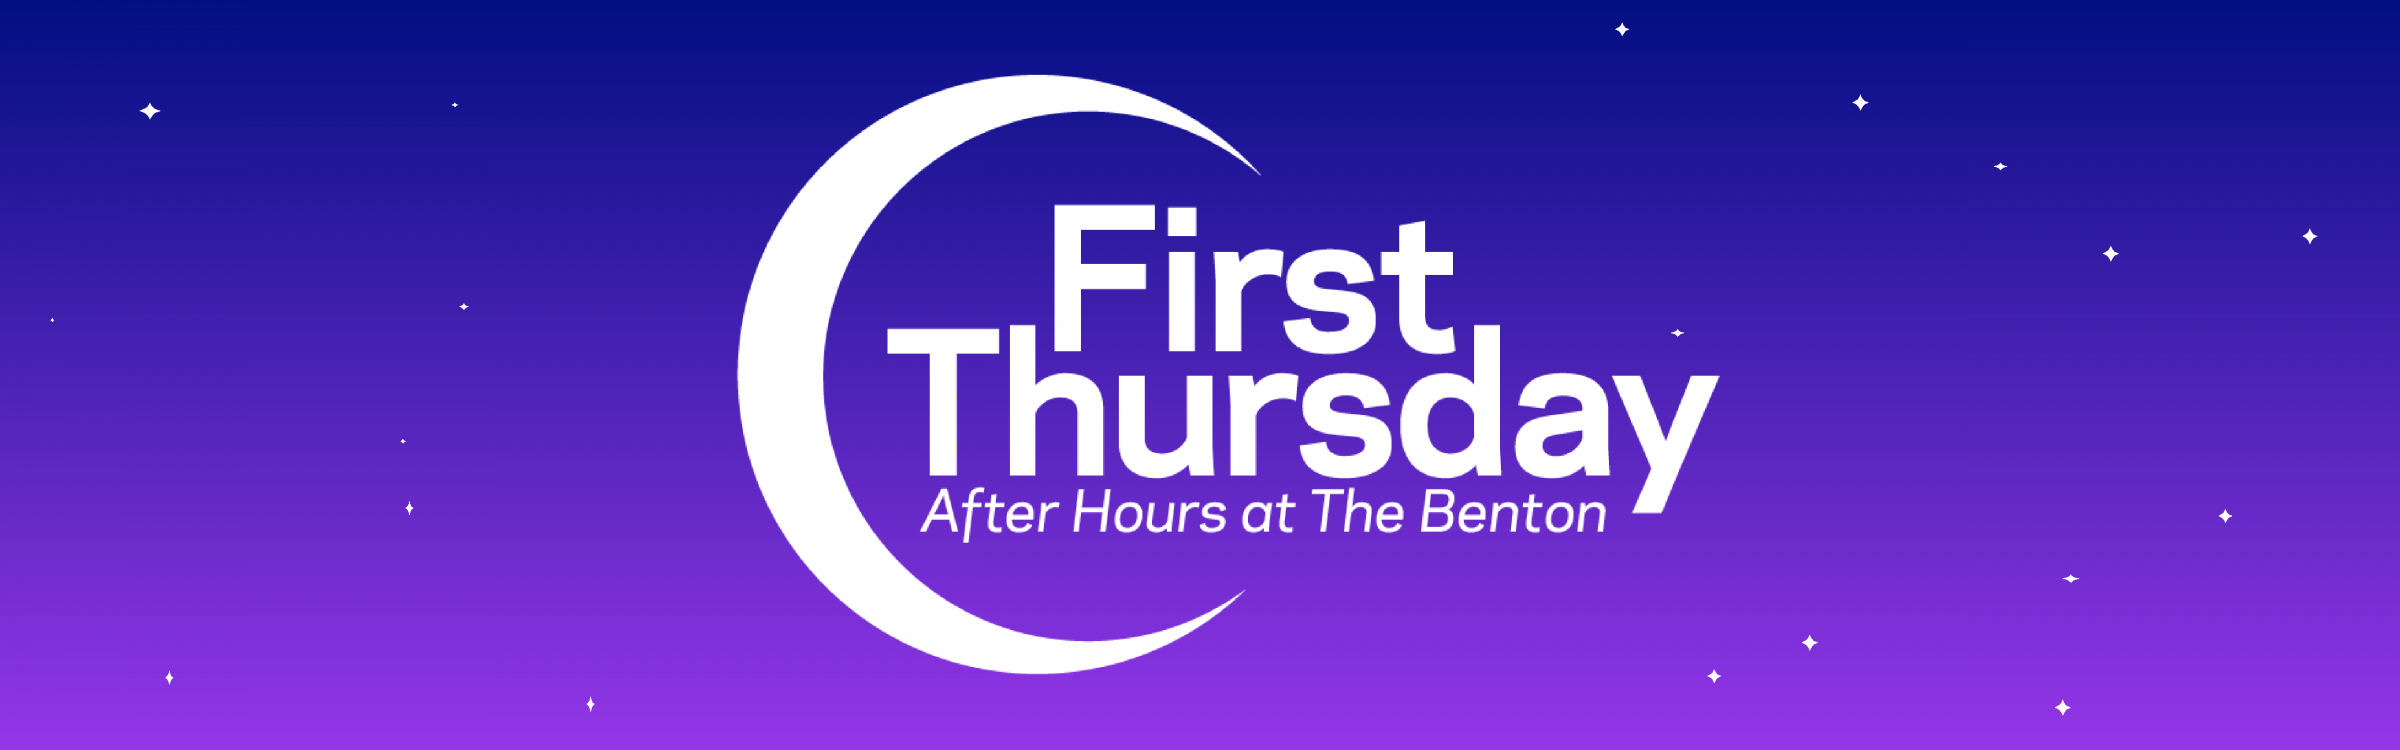 Blue and Purple Web banner with the text "First Thursday. After Hours at The Benton."